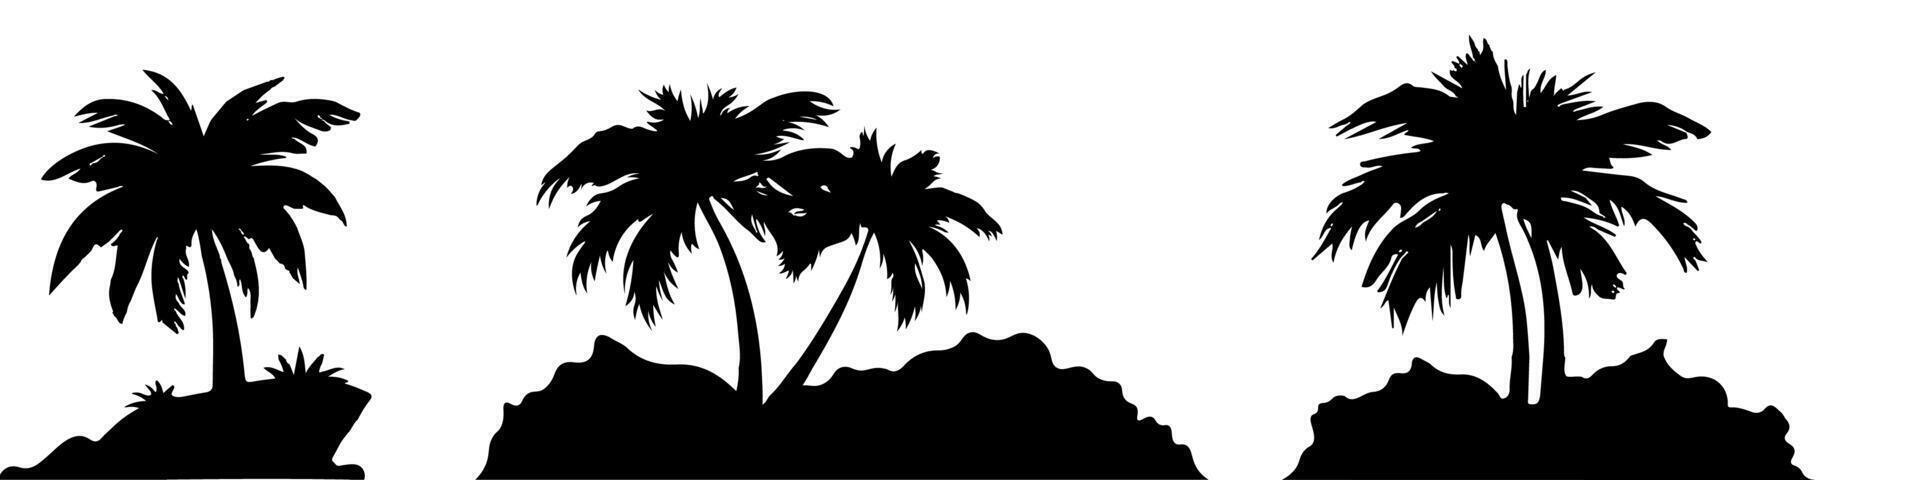 coconut tree silhouette design with rock base. vector ilustration